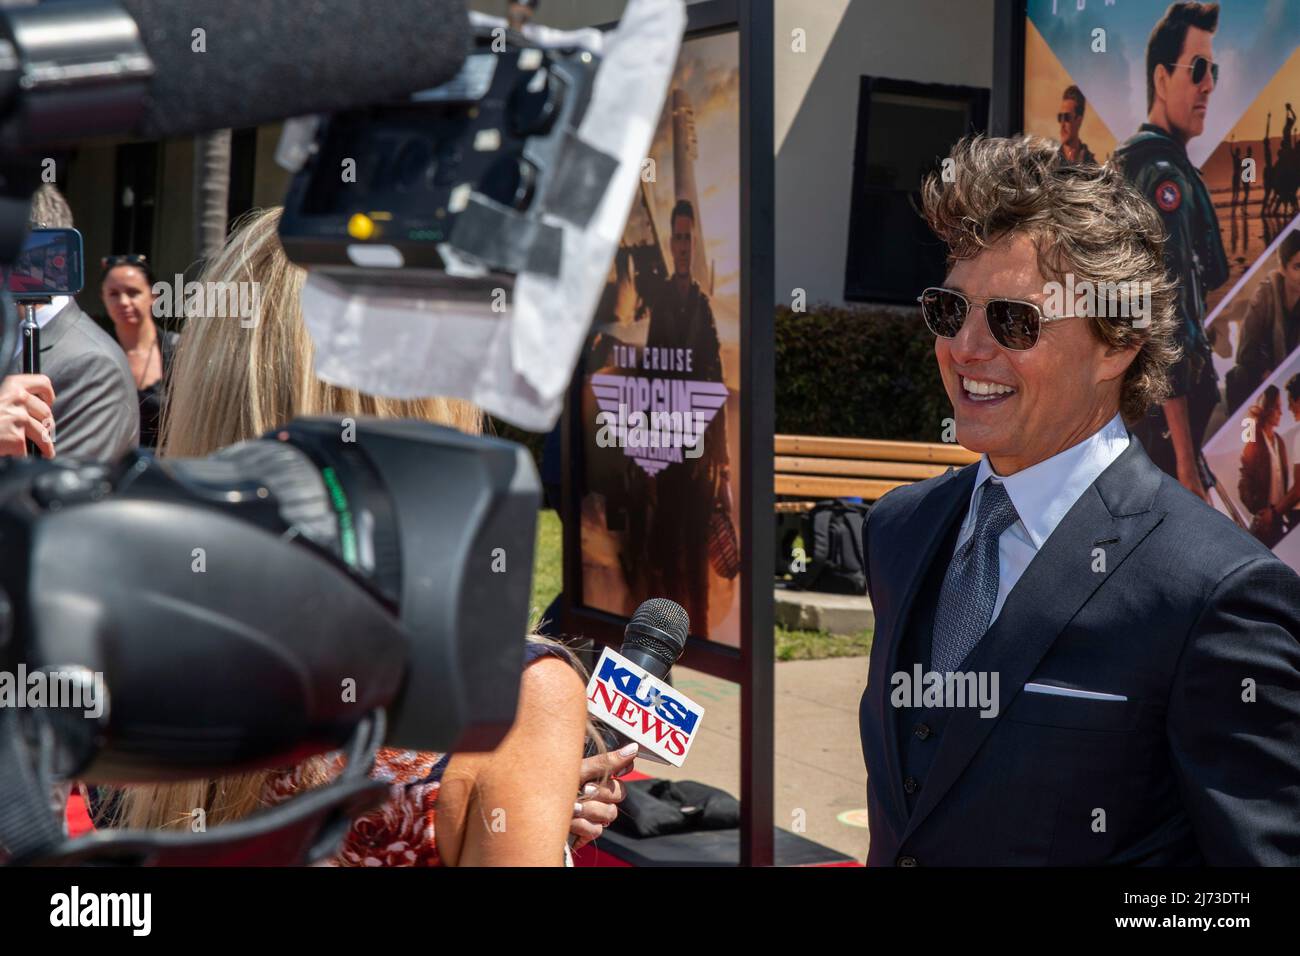 San Diego, United States. 04 May, 2022. American actor Tom Cruise is interviewed on the red carpet during the advance movie premiere of Top Gun: Maverick, at Naval Air Station North Island, May 4, 2022 in San Diego, California, Top Gun: Maverick, is the sequel to the 1986 blockbuster, Top Gun and will be released worldwide on May 27.  Credit: MC2 Keenan Daniels/US Navy/Alamy Live News Stock Photo